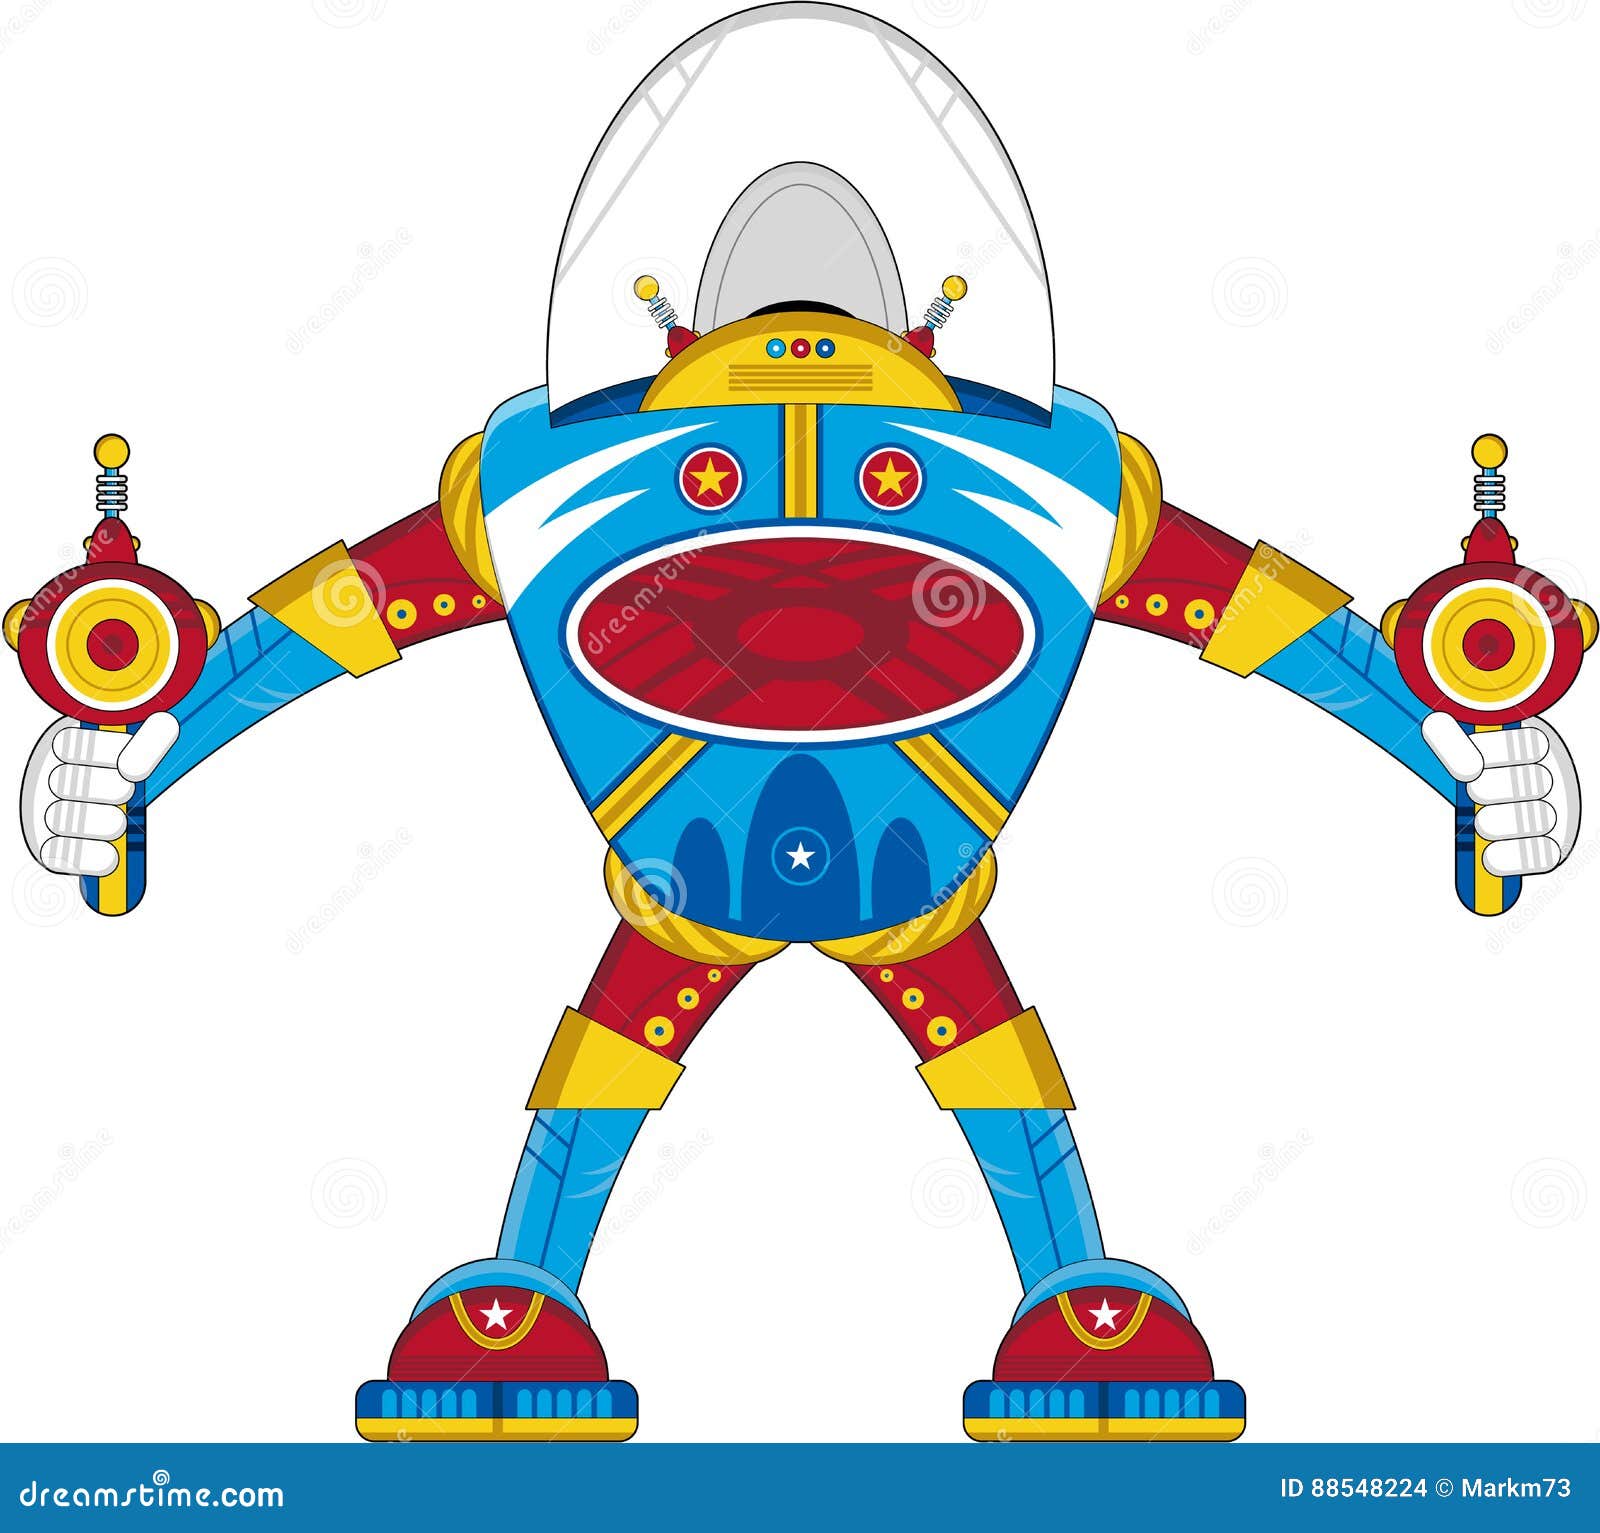 Cartoon Giant Robot Spacesuit Stock Vector - Illustration of space, star:  88548224